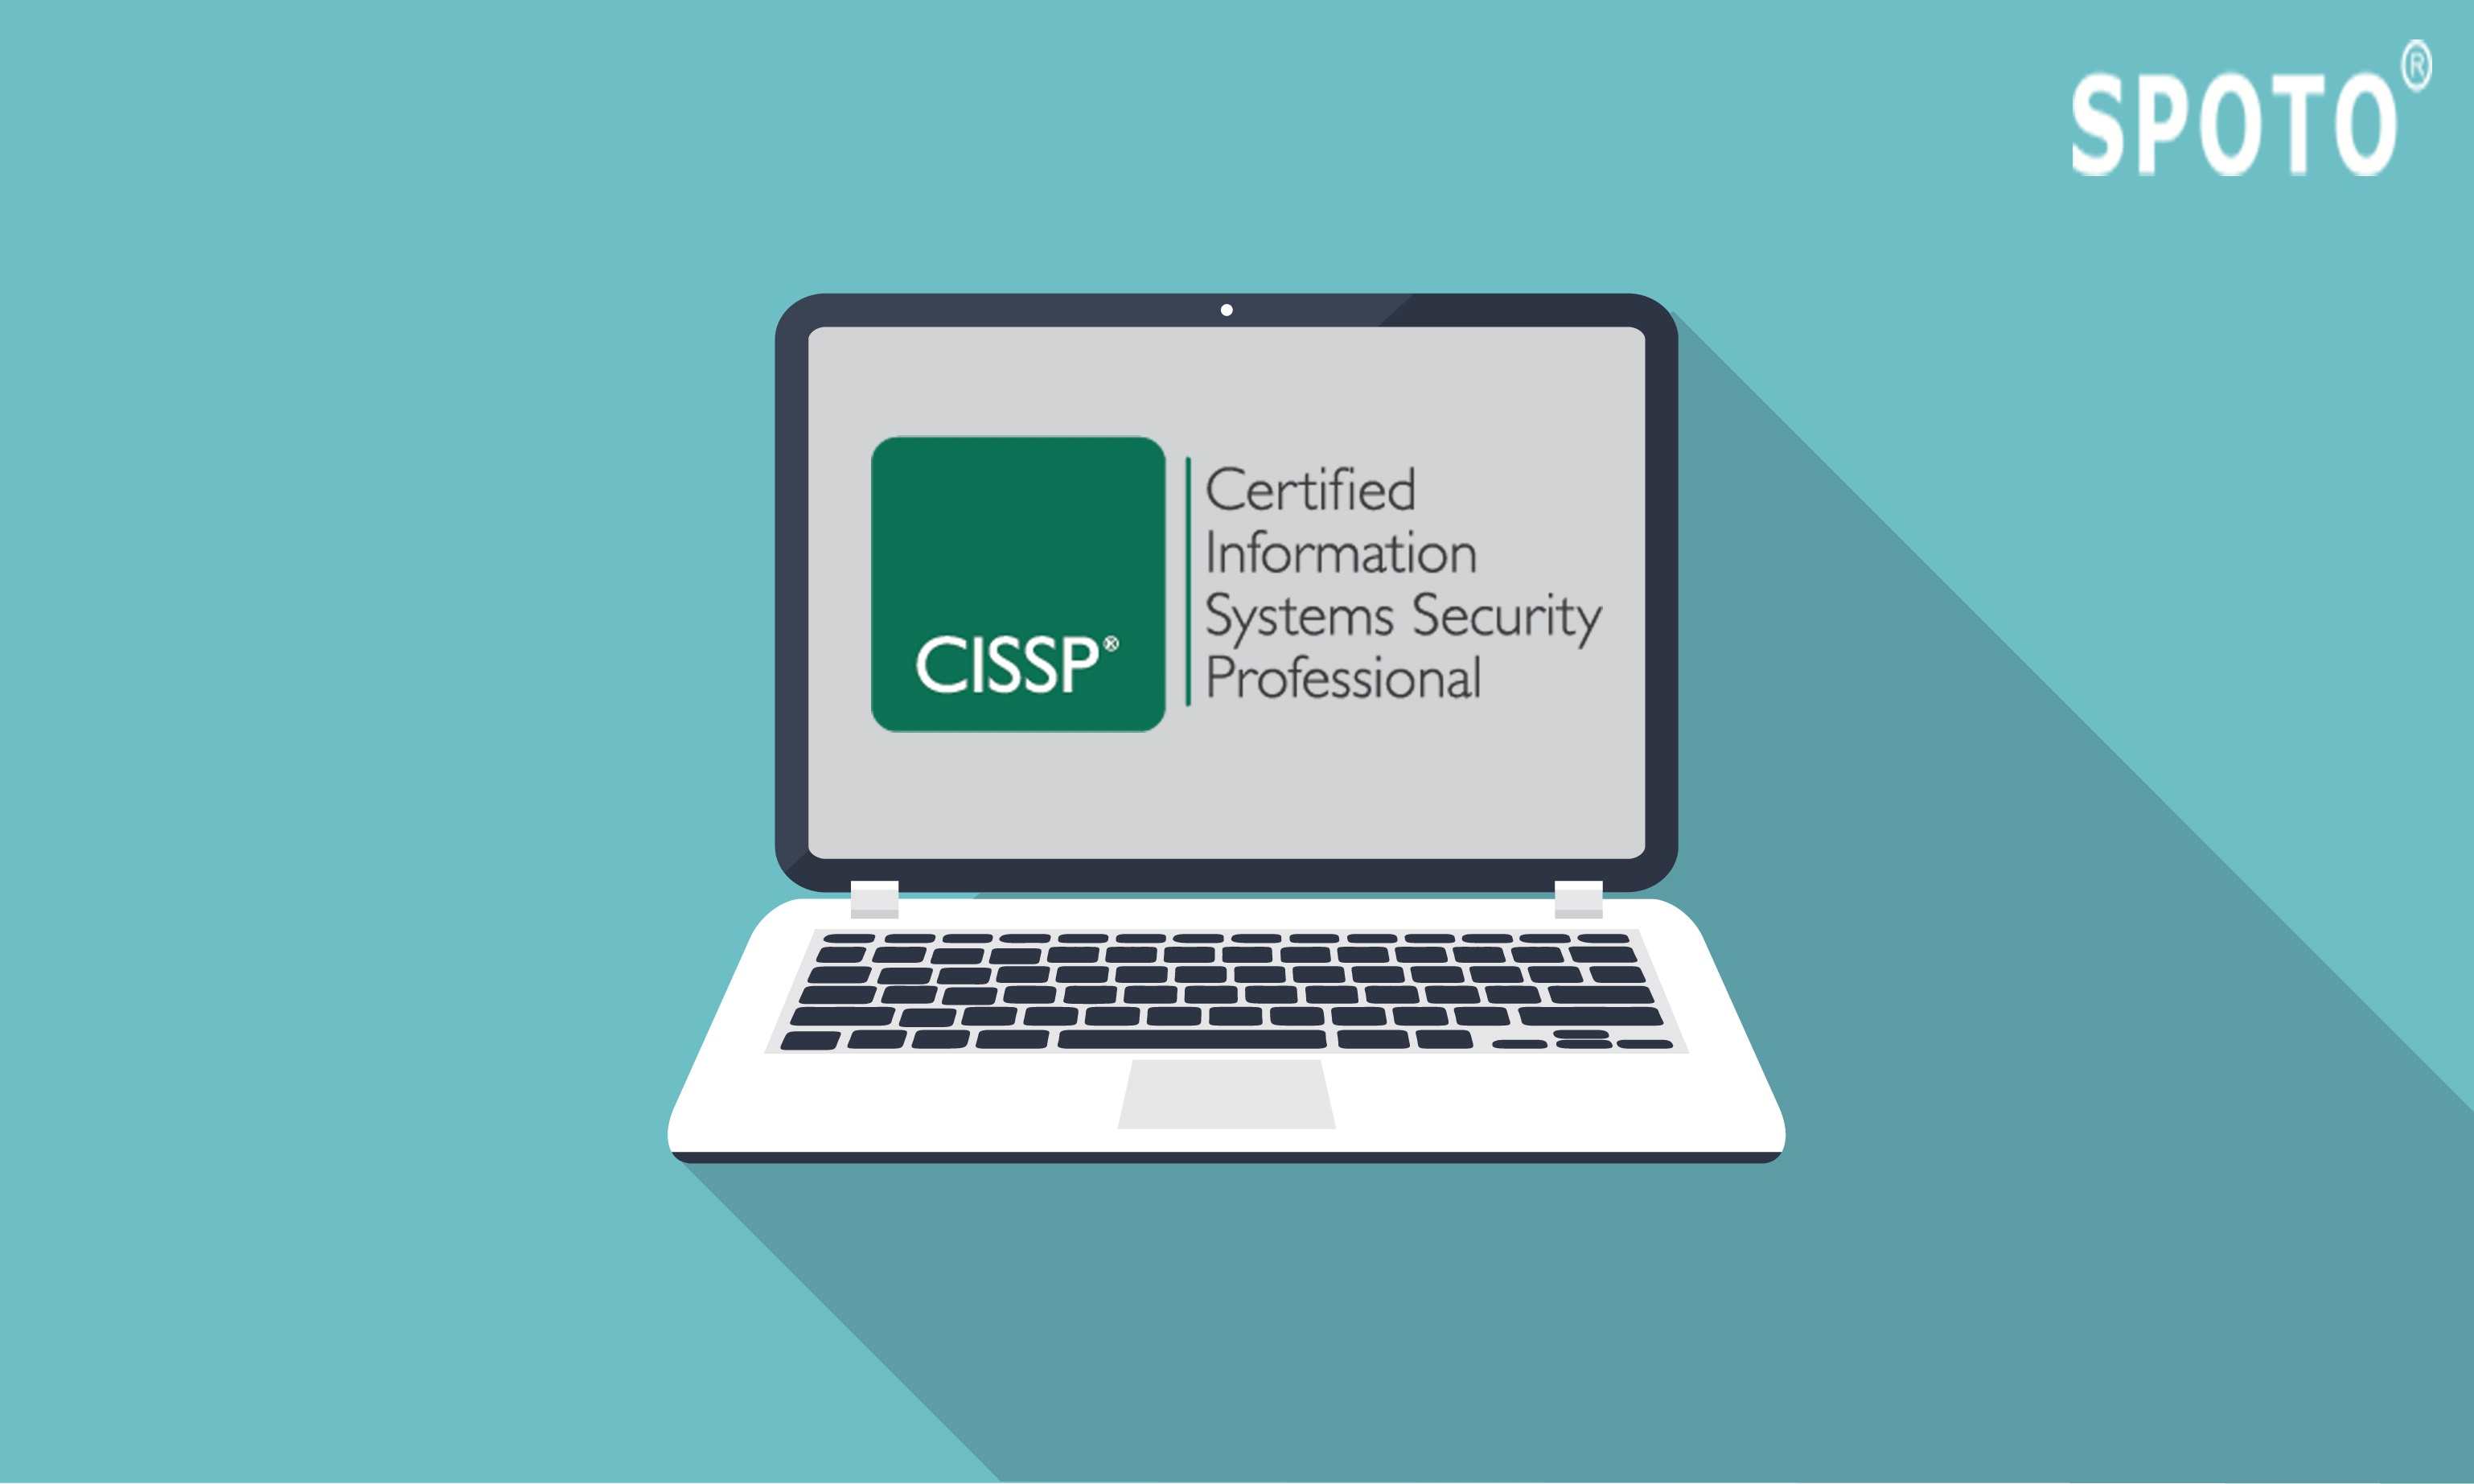 What Are the Requirements to Become CISSP Certified?